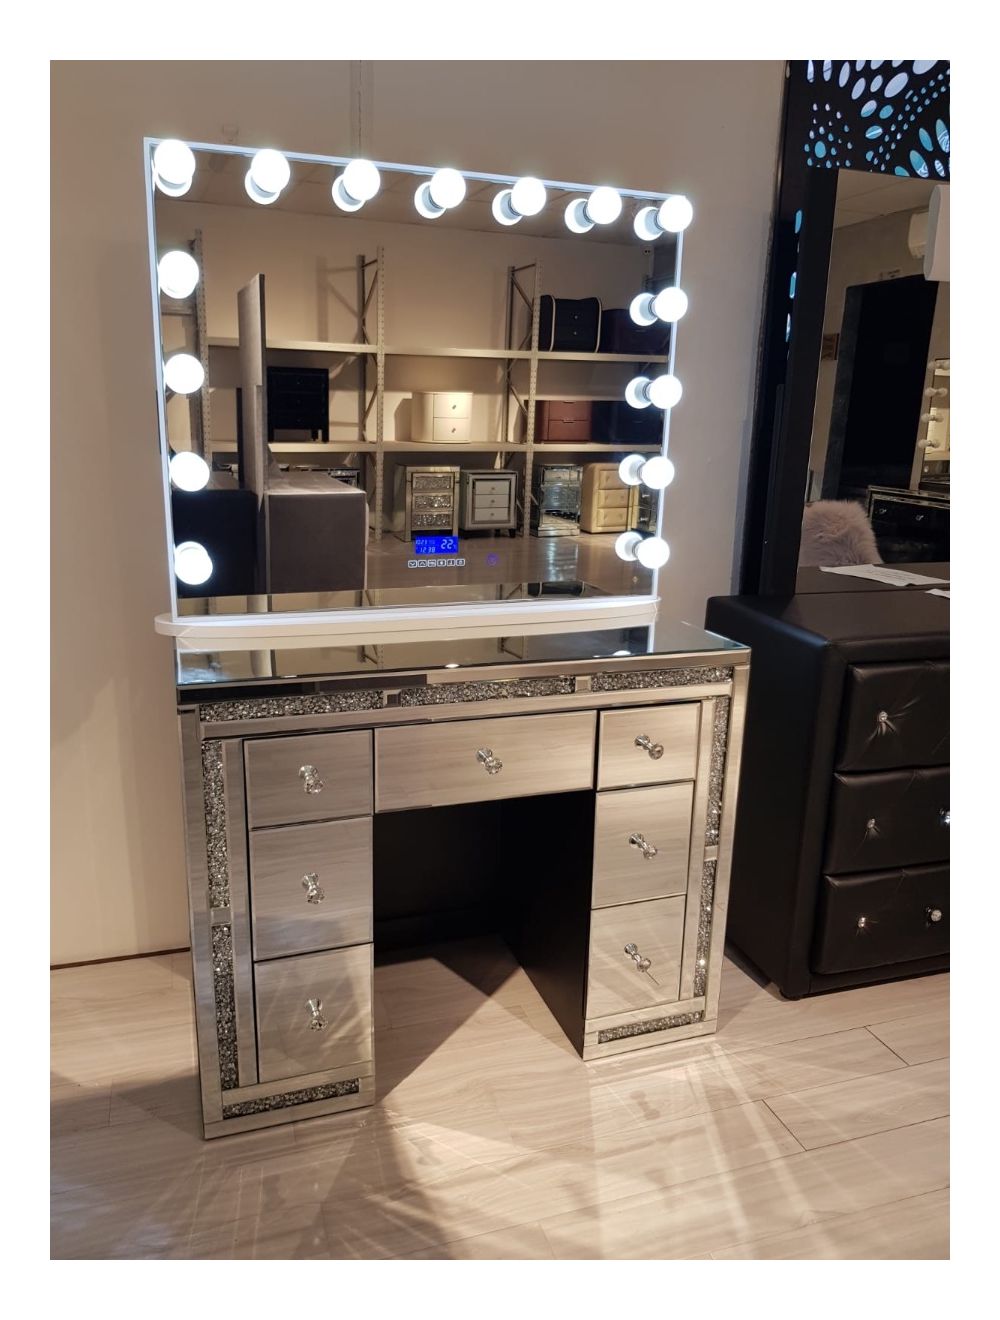 Full Function Bluetooth Makeup Mirror, Mirrored Glass Dressing Table